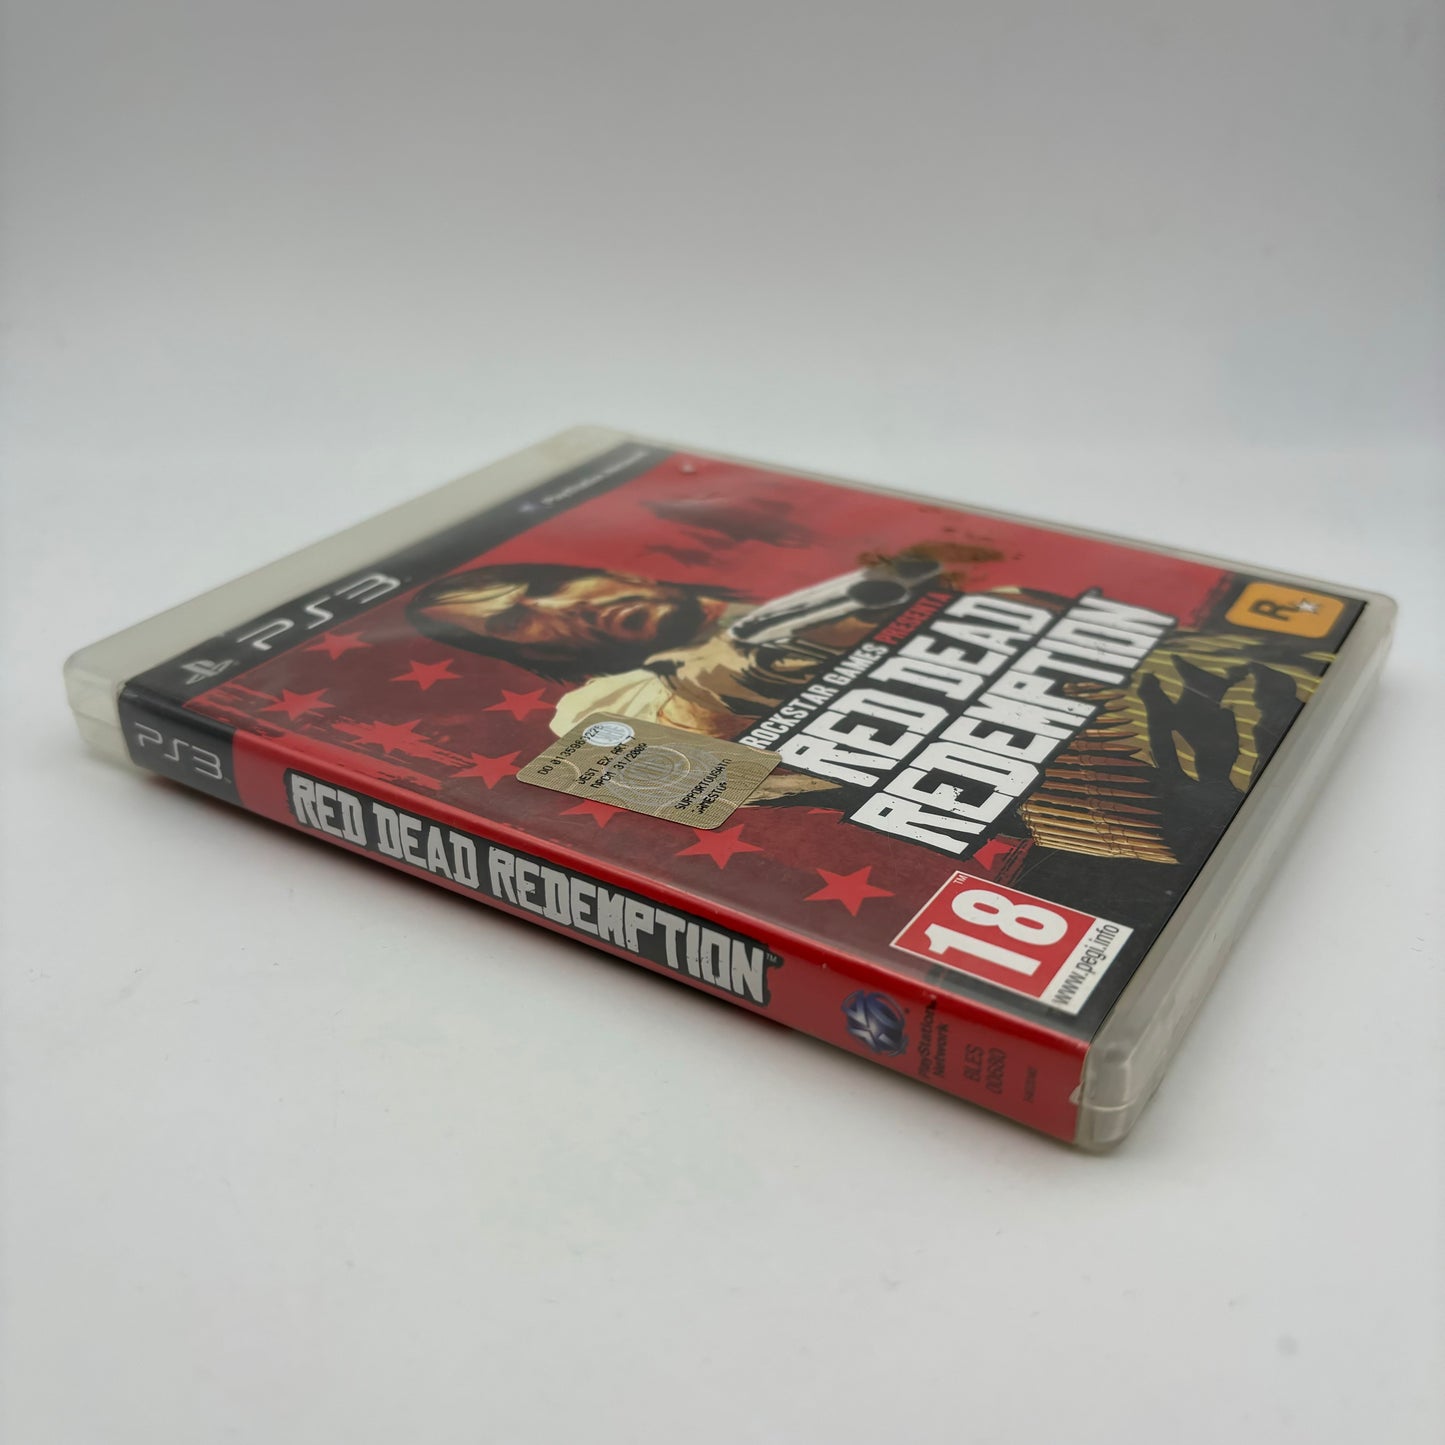 Red Dead Redemption Ps3 Pal Ita (USATO)